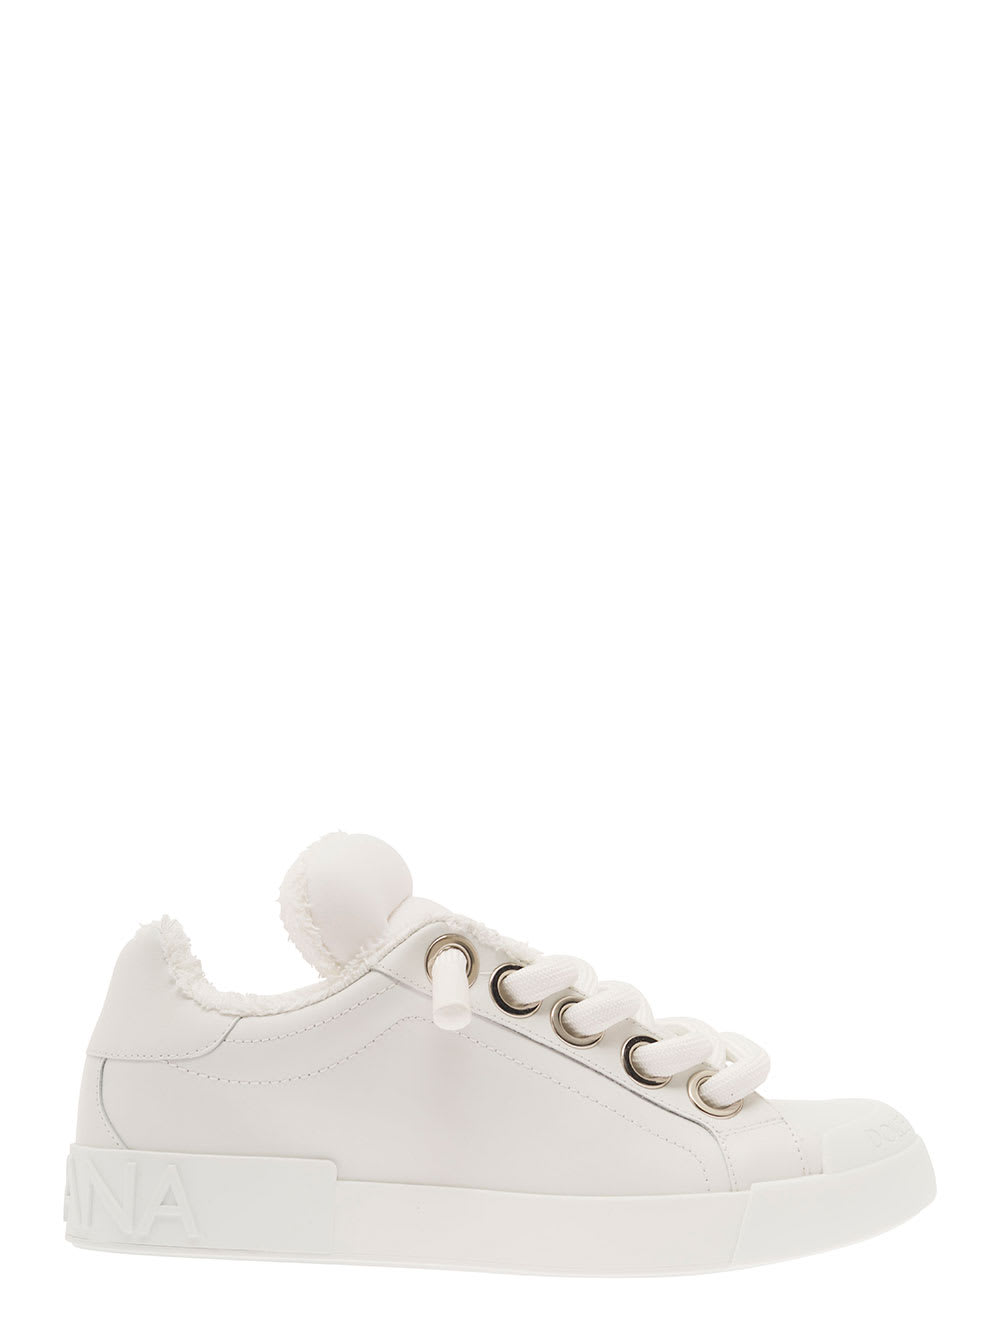 DOLCE & GABBANA PORTOFINO WHITE LOW-TOP SNEAKERS WITH OVERSIZED LACES IN LEATHER MAN